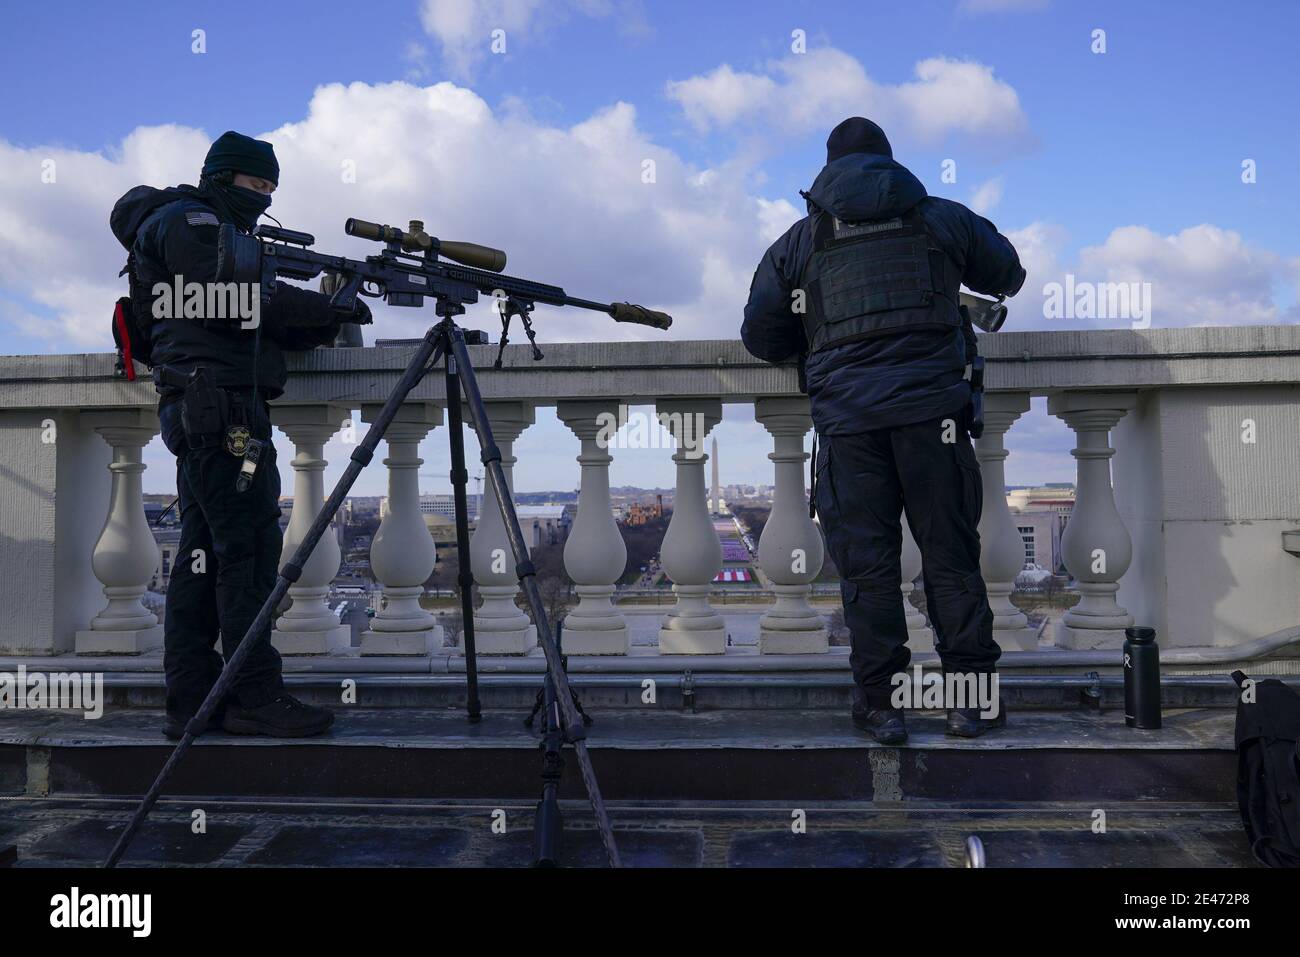 Washington, United States. 20th Jan, 2021. Law enforcement personnel monitor the National Mall area during the 59th Presidential Inauguration at the U.S. Capitol in Washington, DC on Wednesday, January 20, 2021. Pool Photo by Susan Walsh/UPI Credit: UPI/Alamy Live News Stock Photo